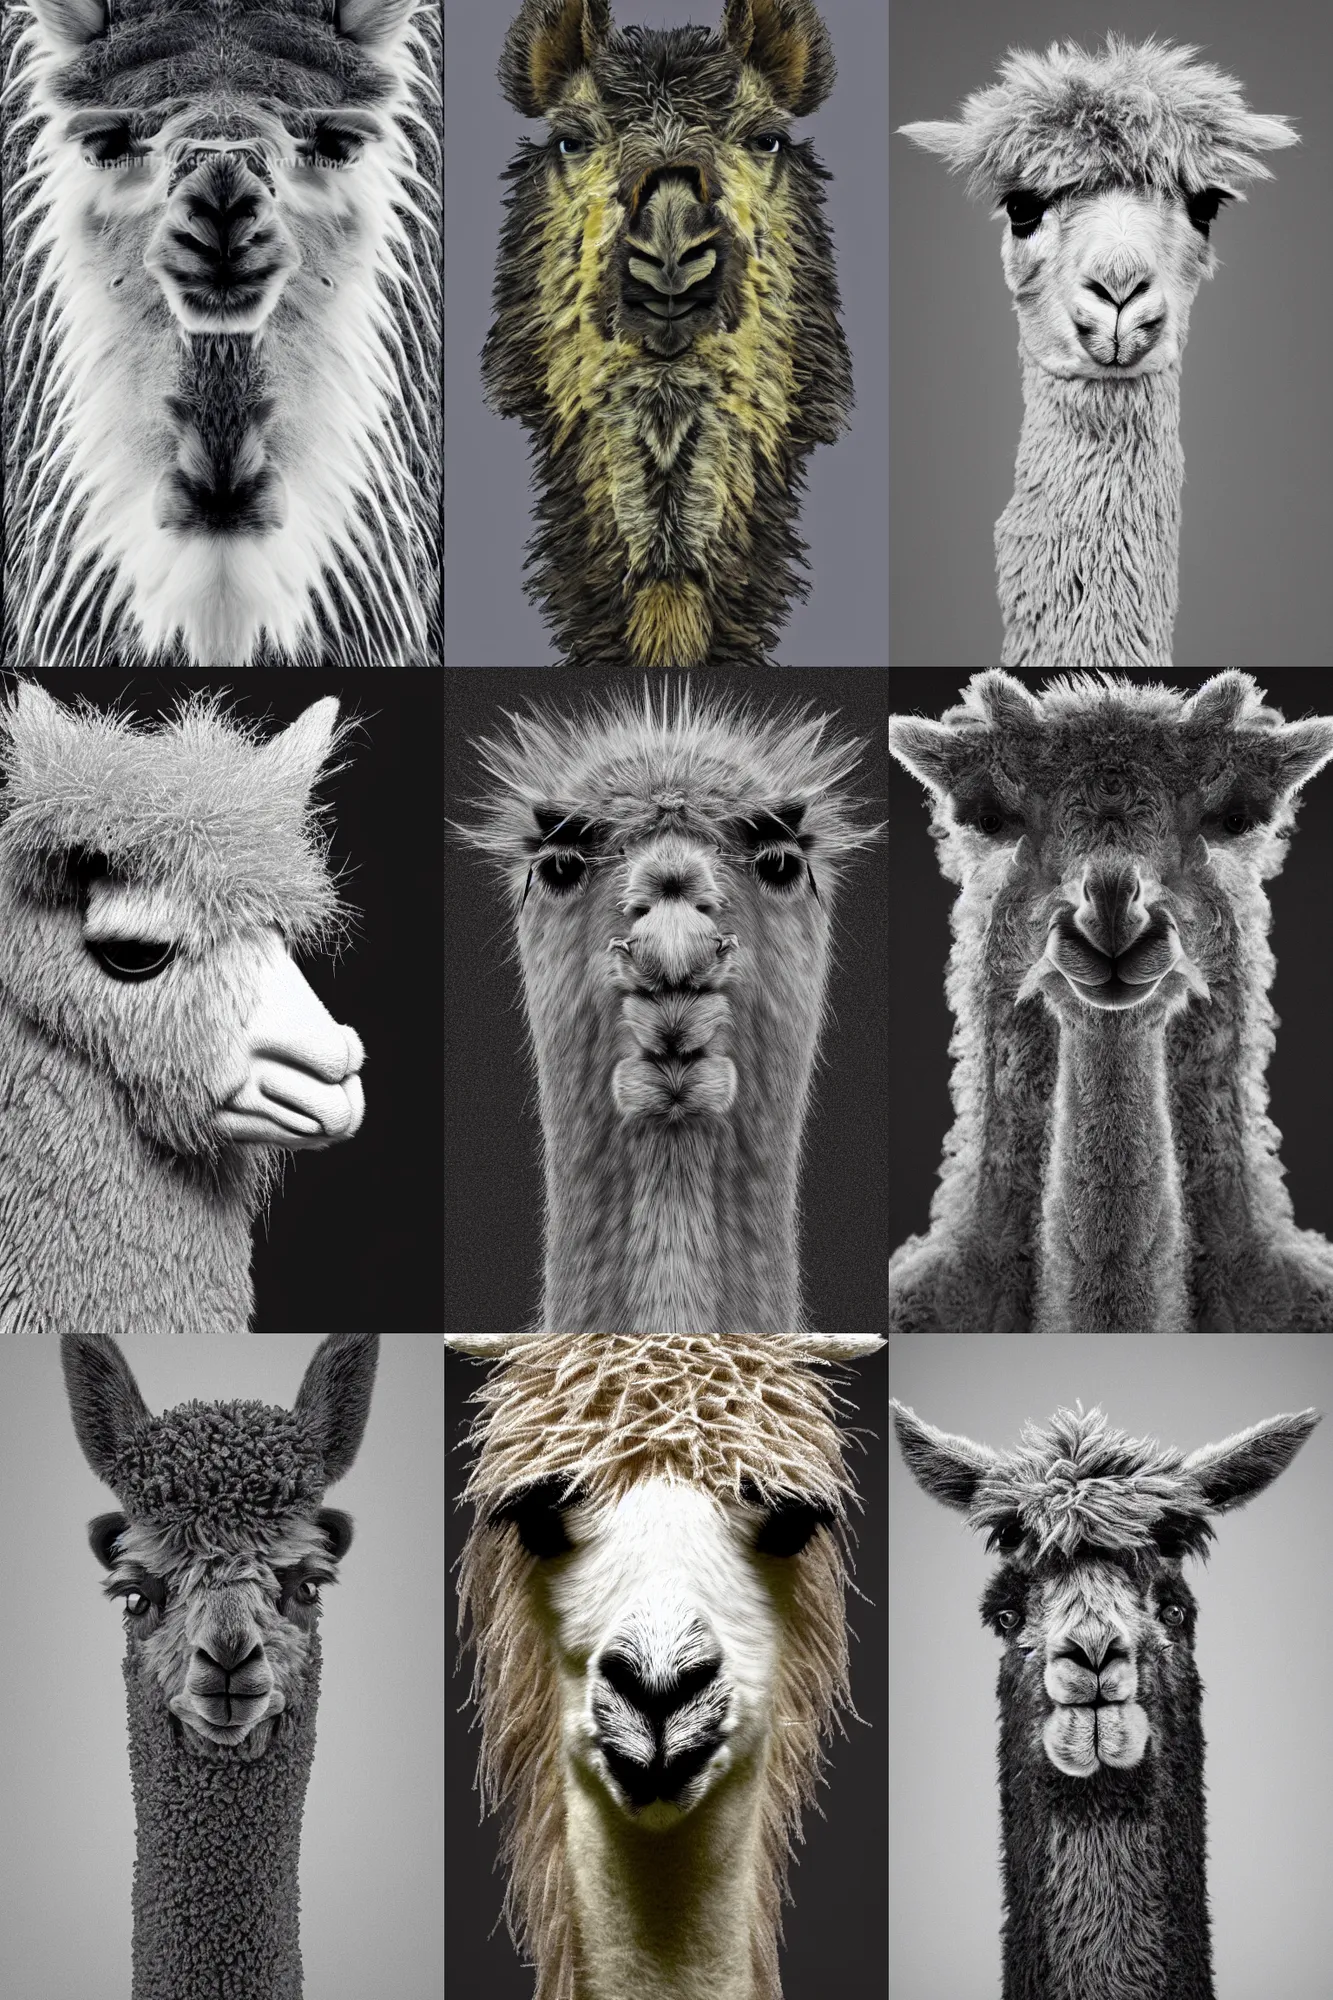 Prompt: highly rhythmic expressionistic wild symmetrical nano-scale sculpture furry llama portrait in Scanning tunneling microscope, HQ 8k scan